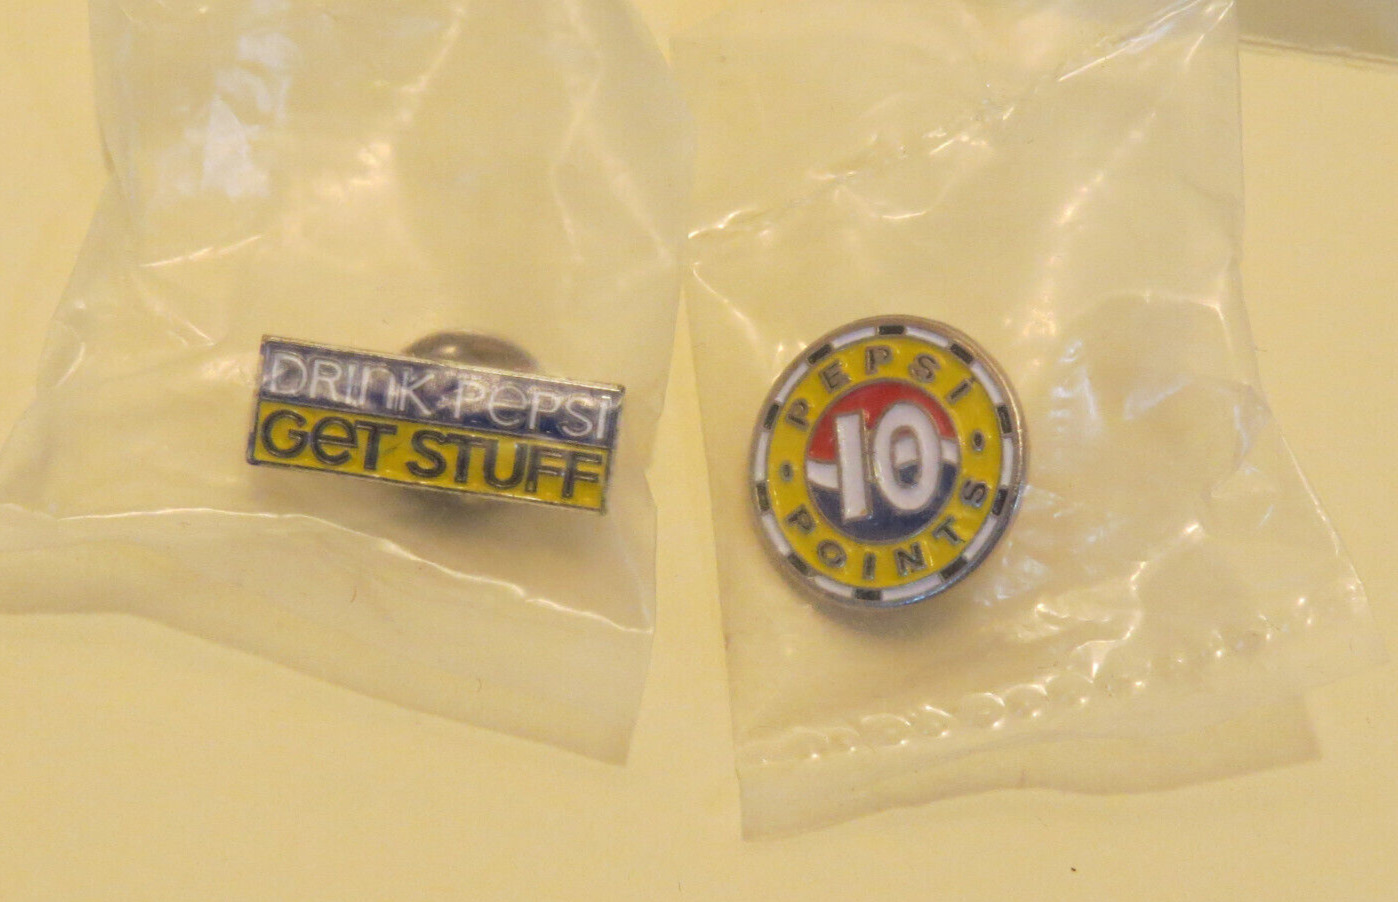 SCARCE 2 Pepsi POINTS Pins - NEW, Excellent Original Sealed Packaging, STUFF